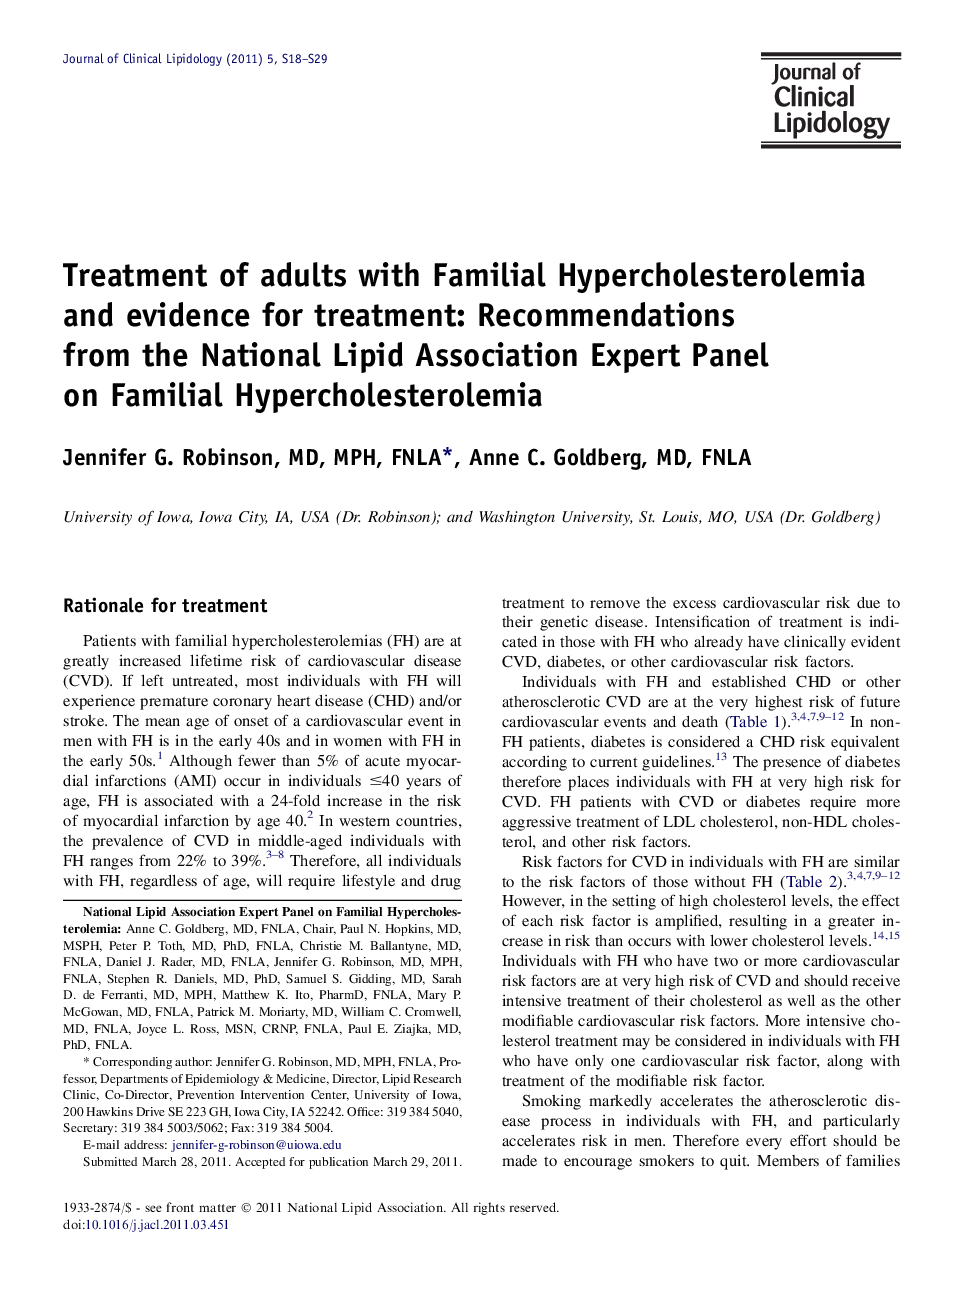 Treatment of adults with Familial Hypercholesterolemia and evidence for treatment: Recommendations from the National Lipid Association Expert Panel on Familial Hypercholesterolemia